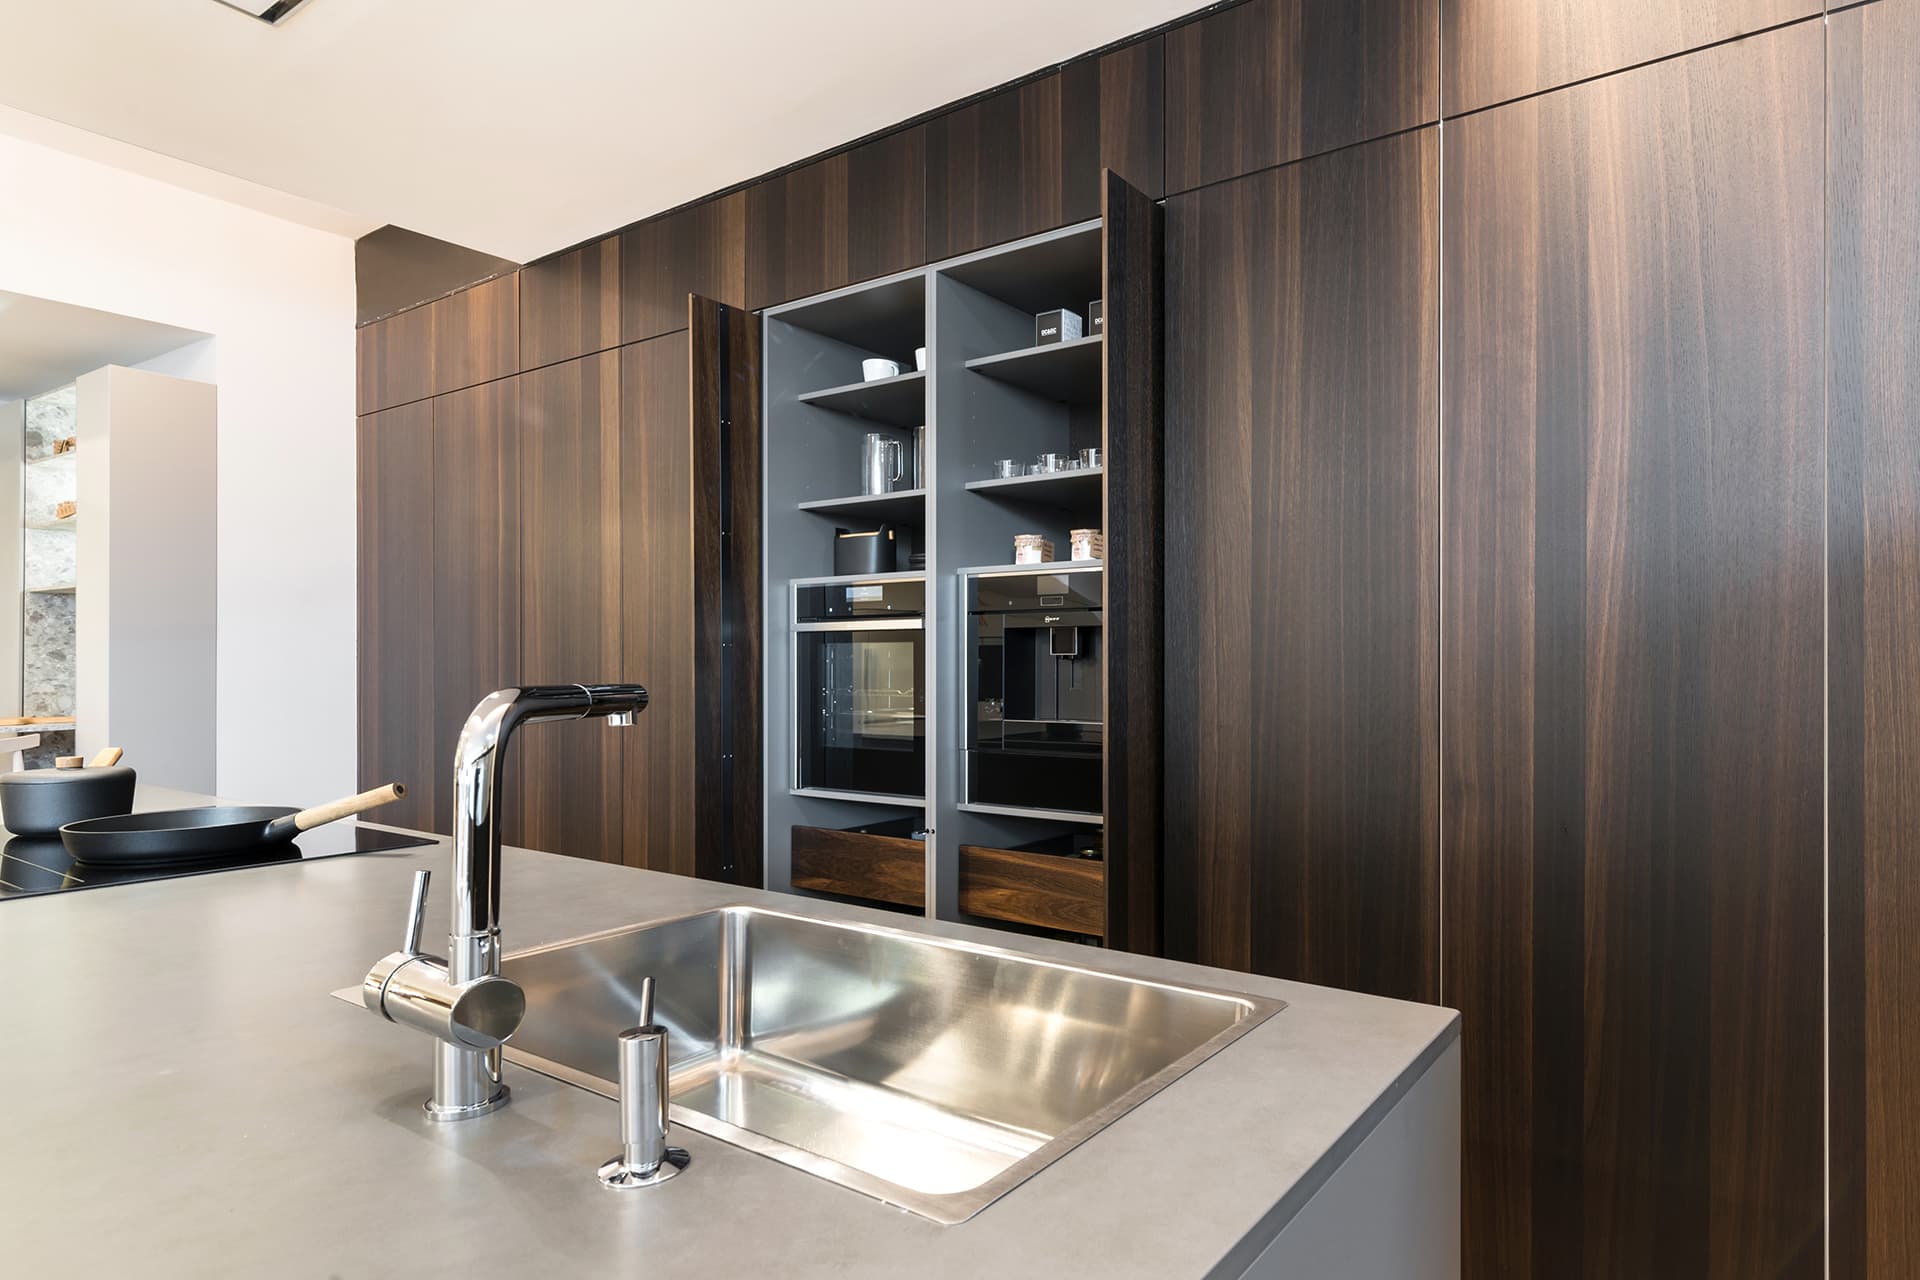 Unit with retractable doors at Santos kitchens